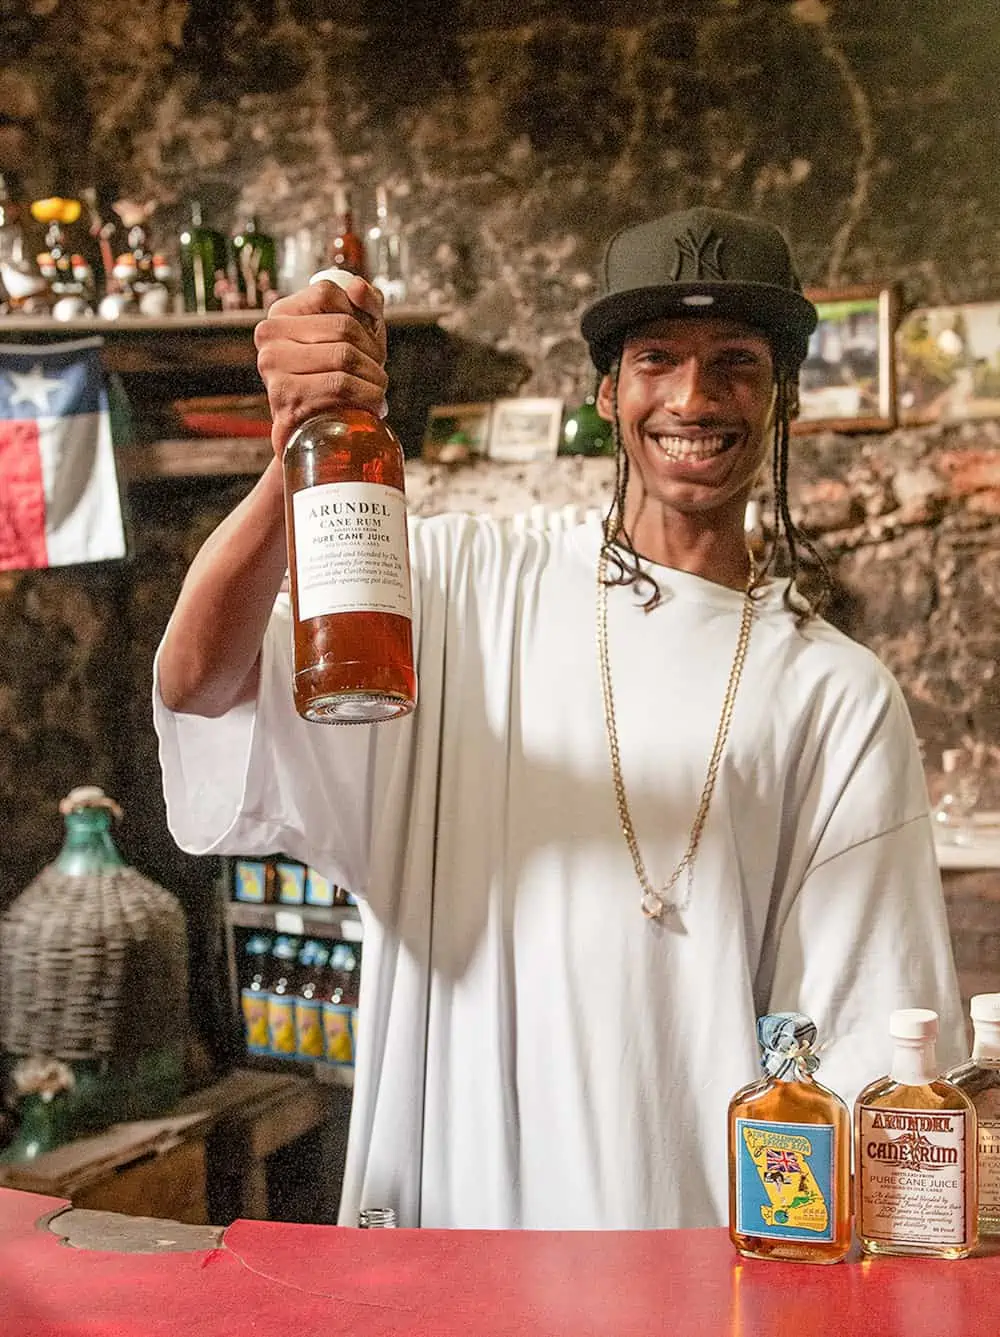 A young man serving rum at Callwood Rum Distillery.